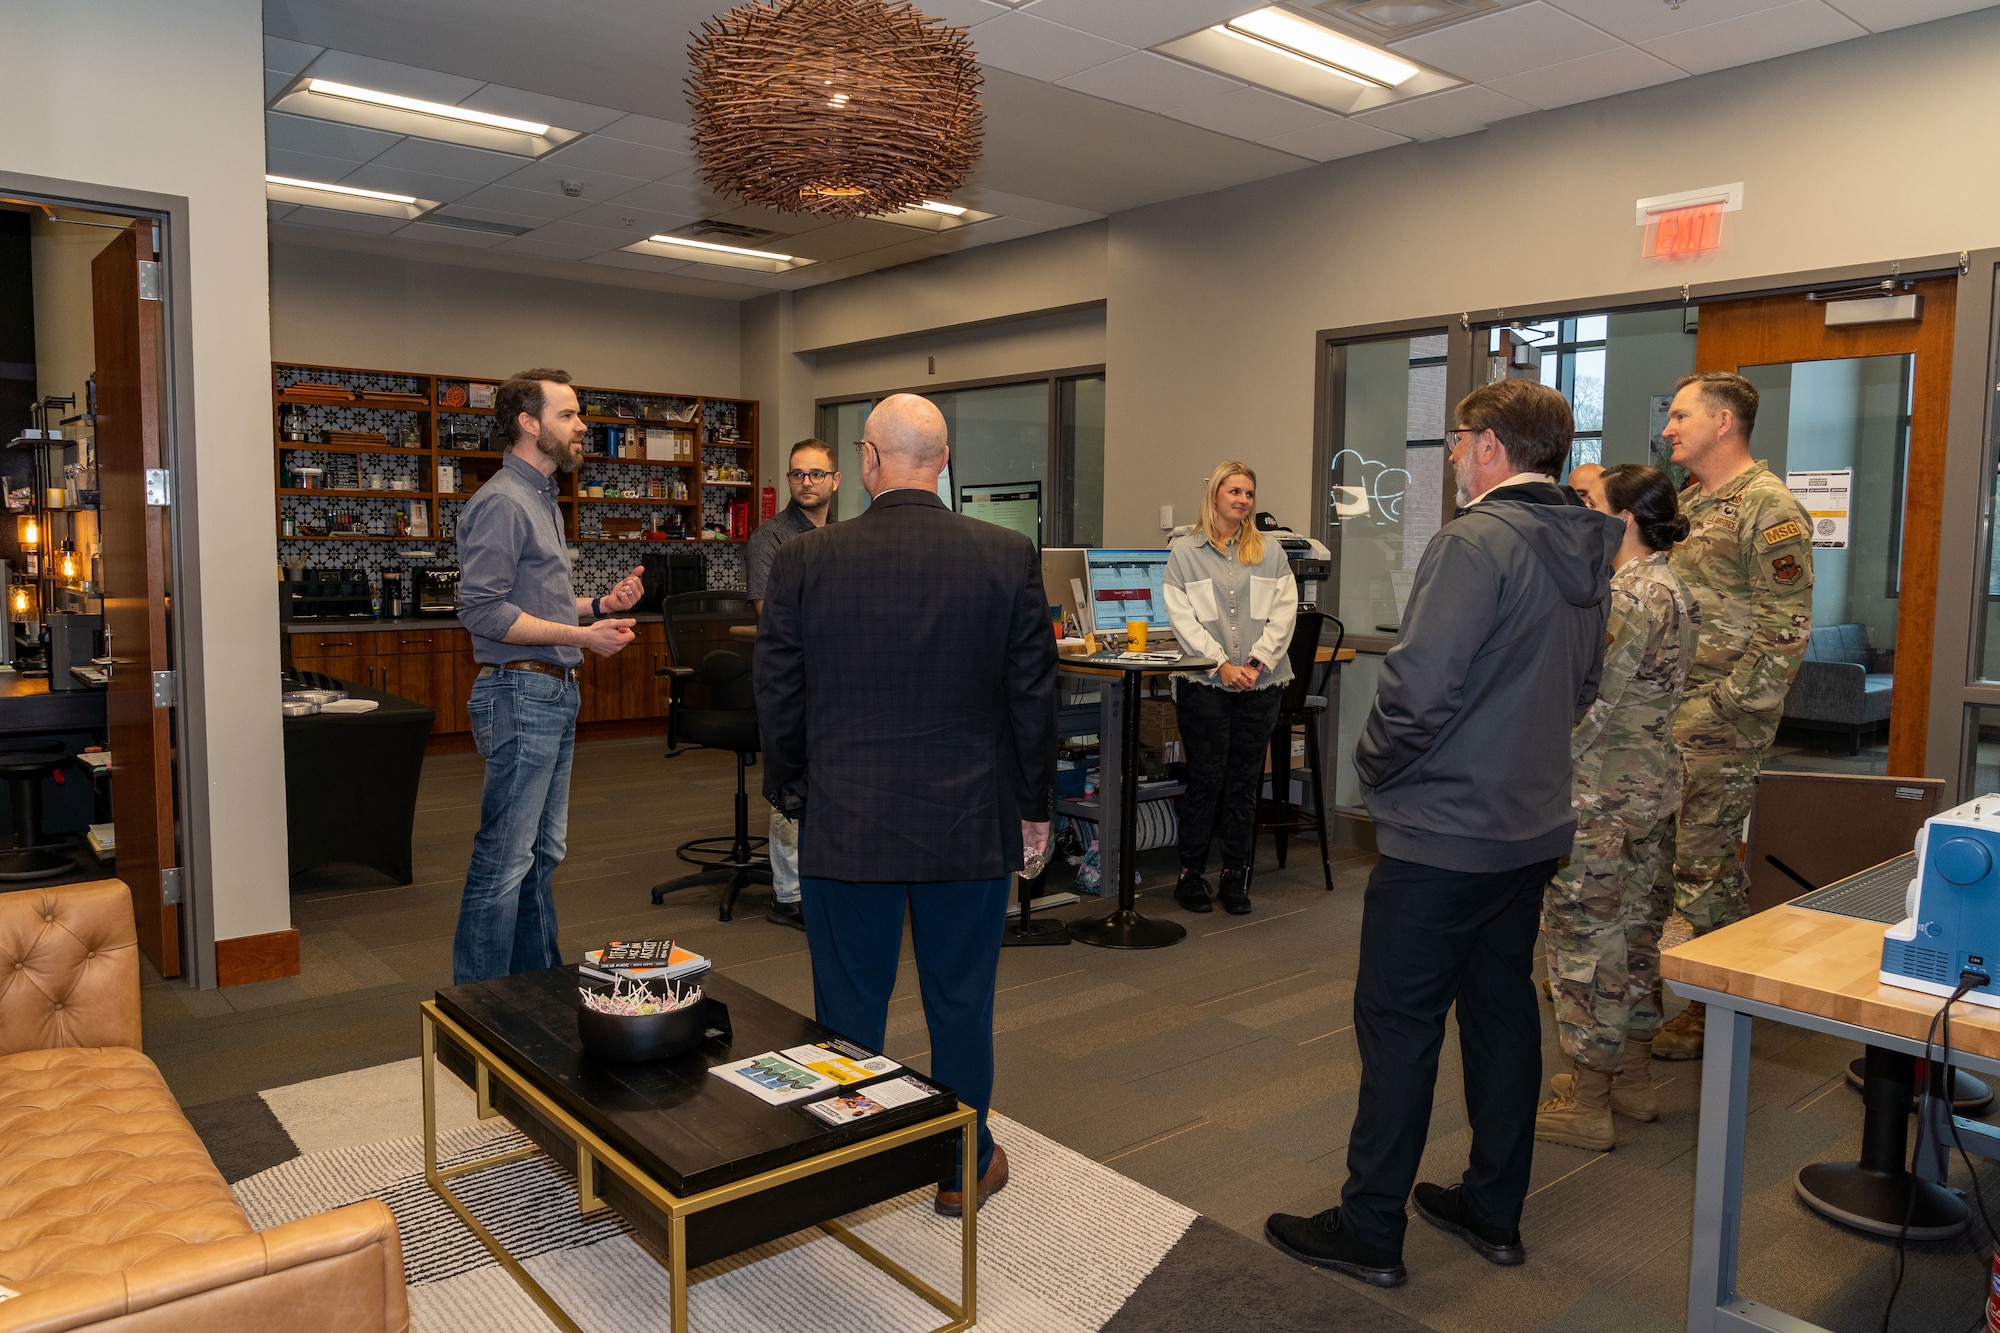 James Wilcox, Professor of practice and director of The Hatchery, explains to members from the 81st Training Wing the Inspiration Lab's purpose in extending entrepreneurial support to the ideas of students at the University of Southern Mississippi in Hattiesburg, Mississippi, March 1, 2024.